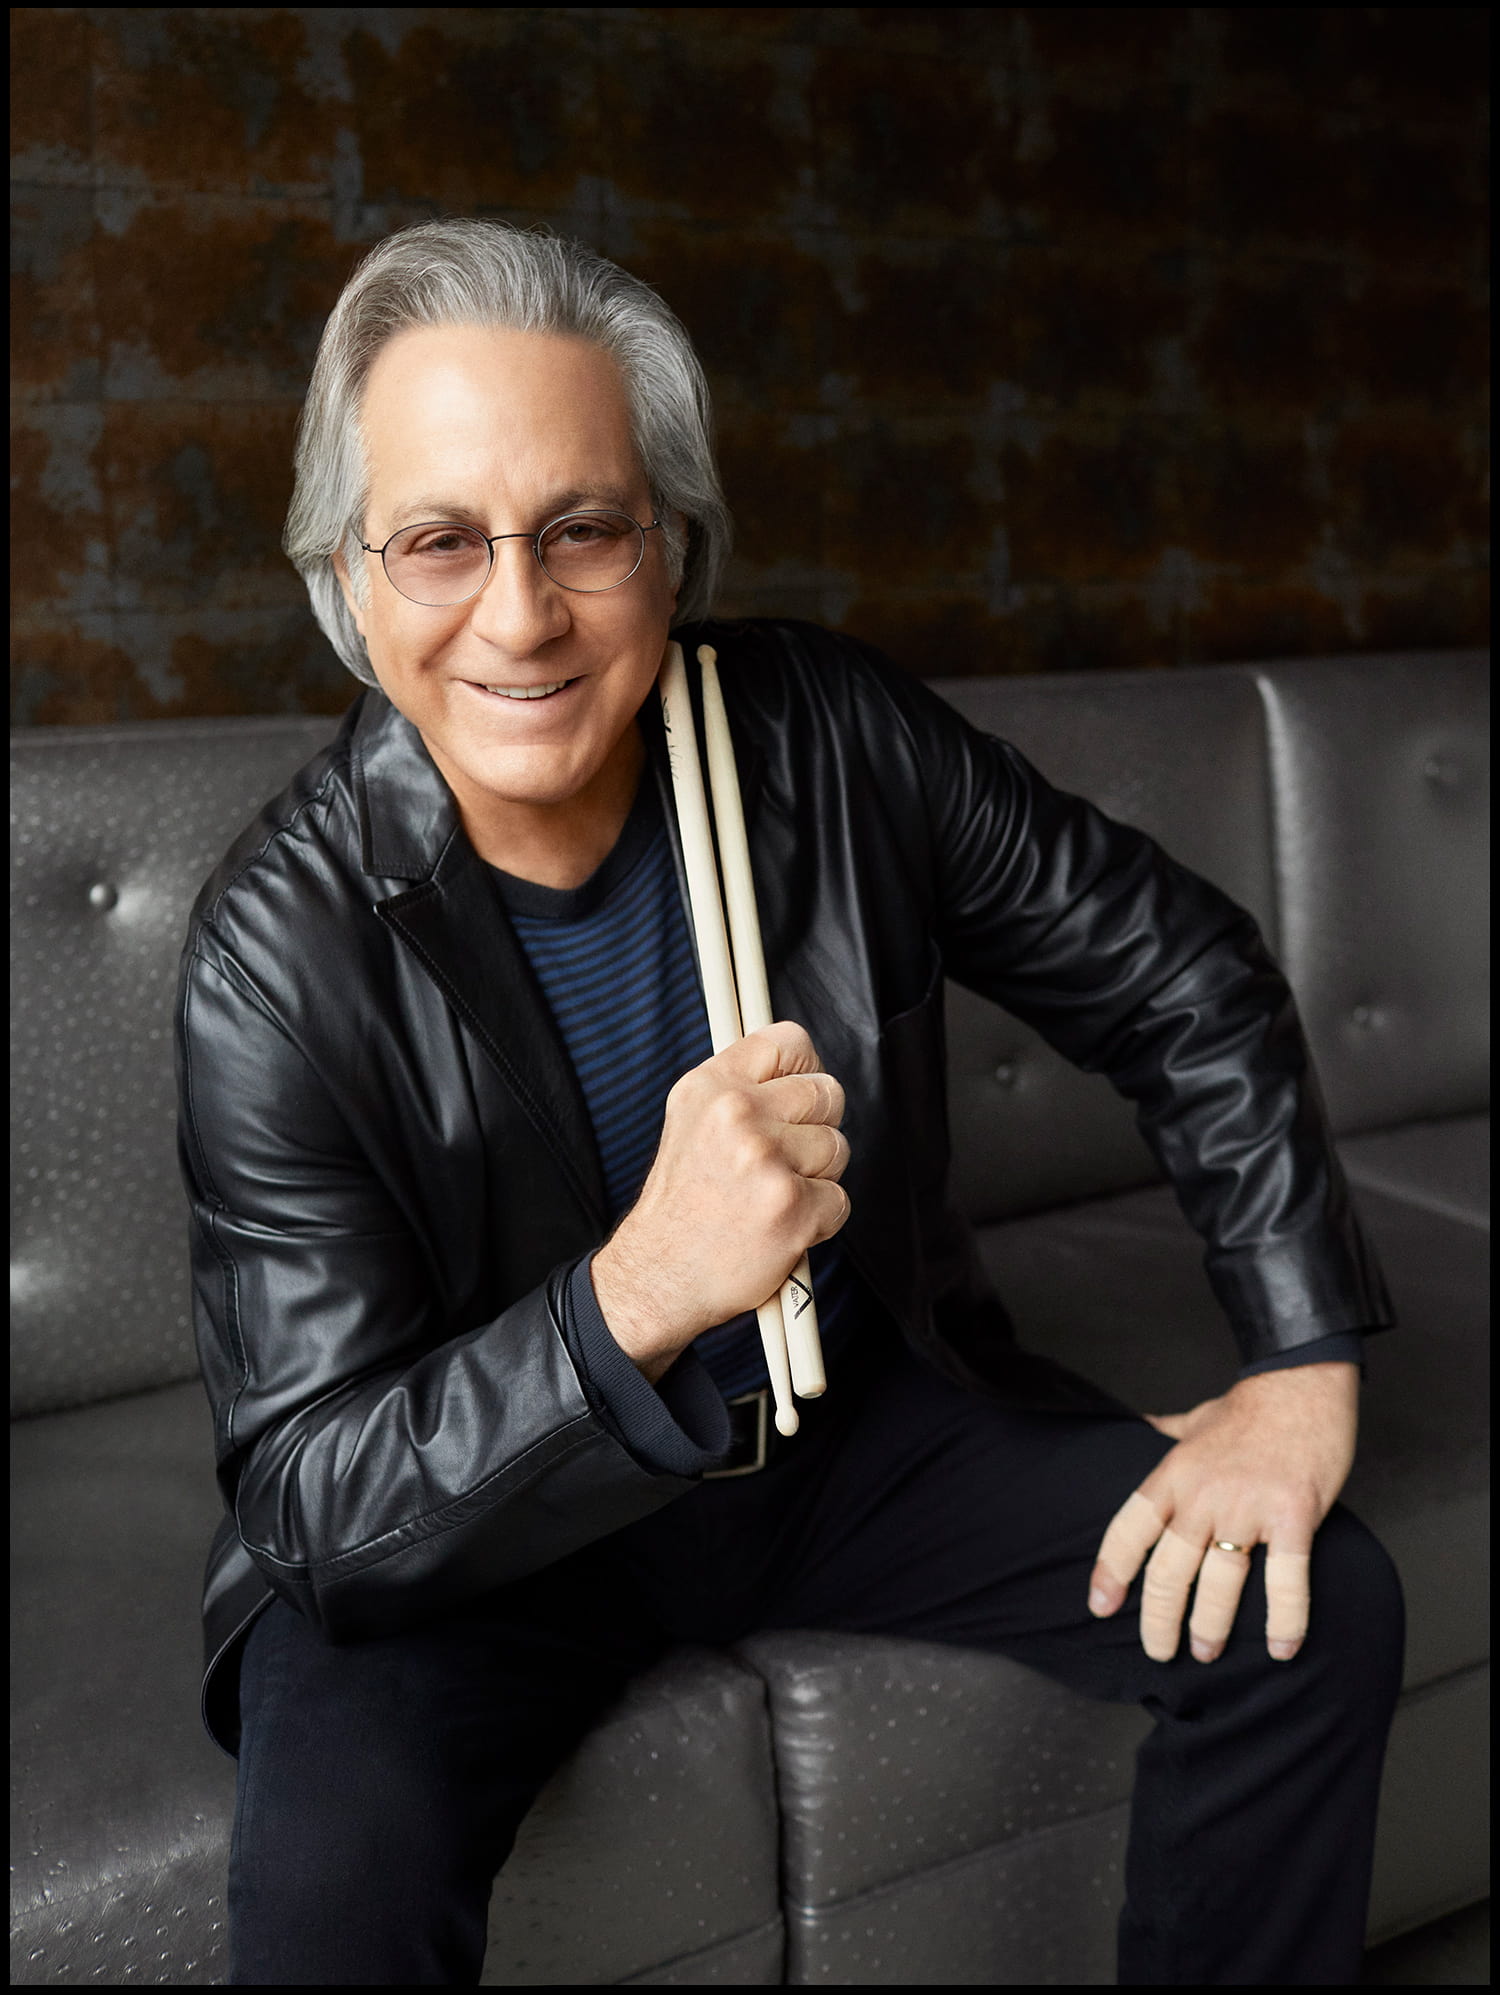 Max Weinberg 2023 portrait by Danny Clinch